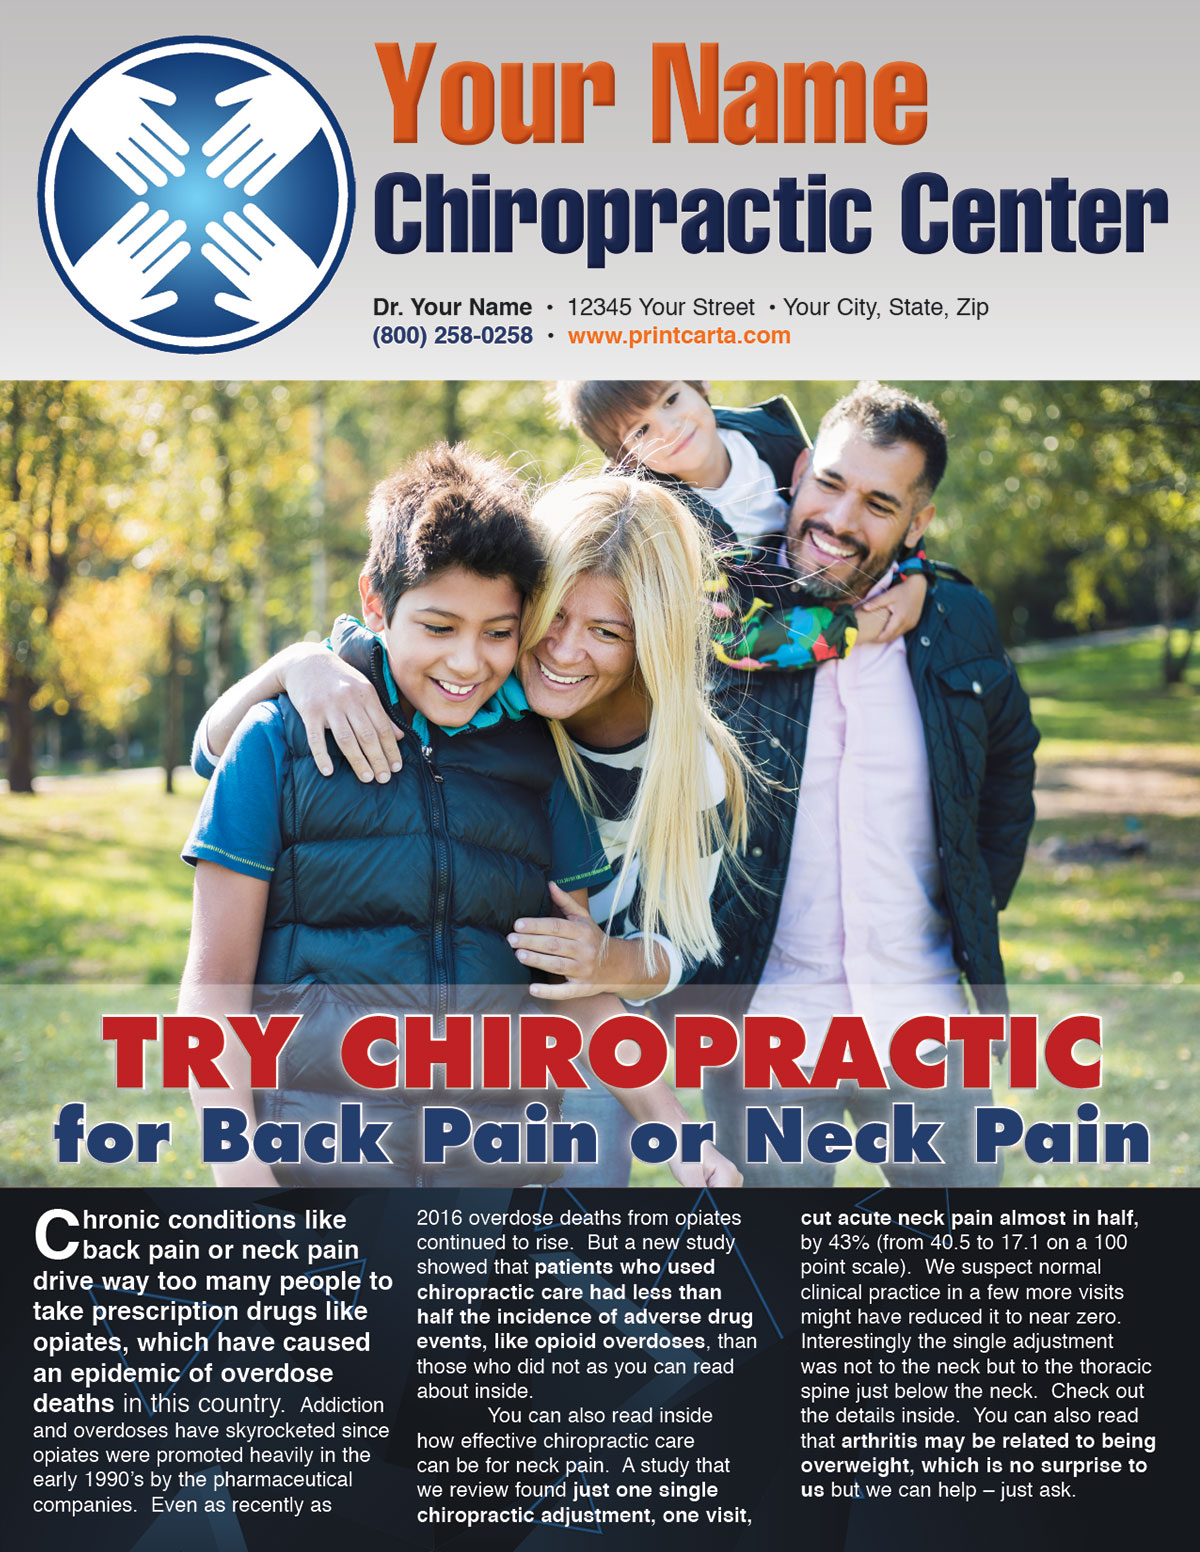 Try Chiropractic for Back or Neck Pain